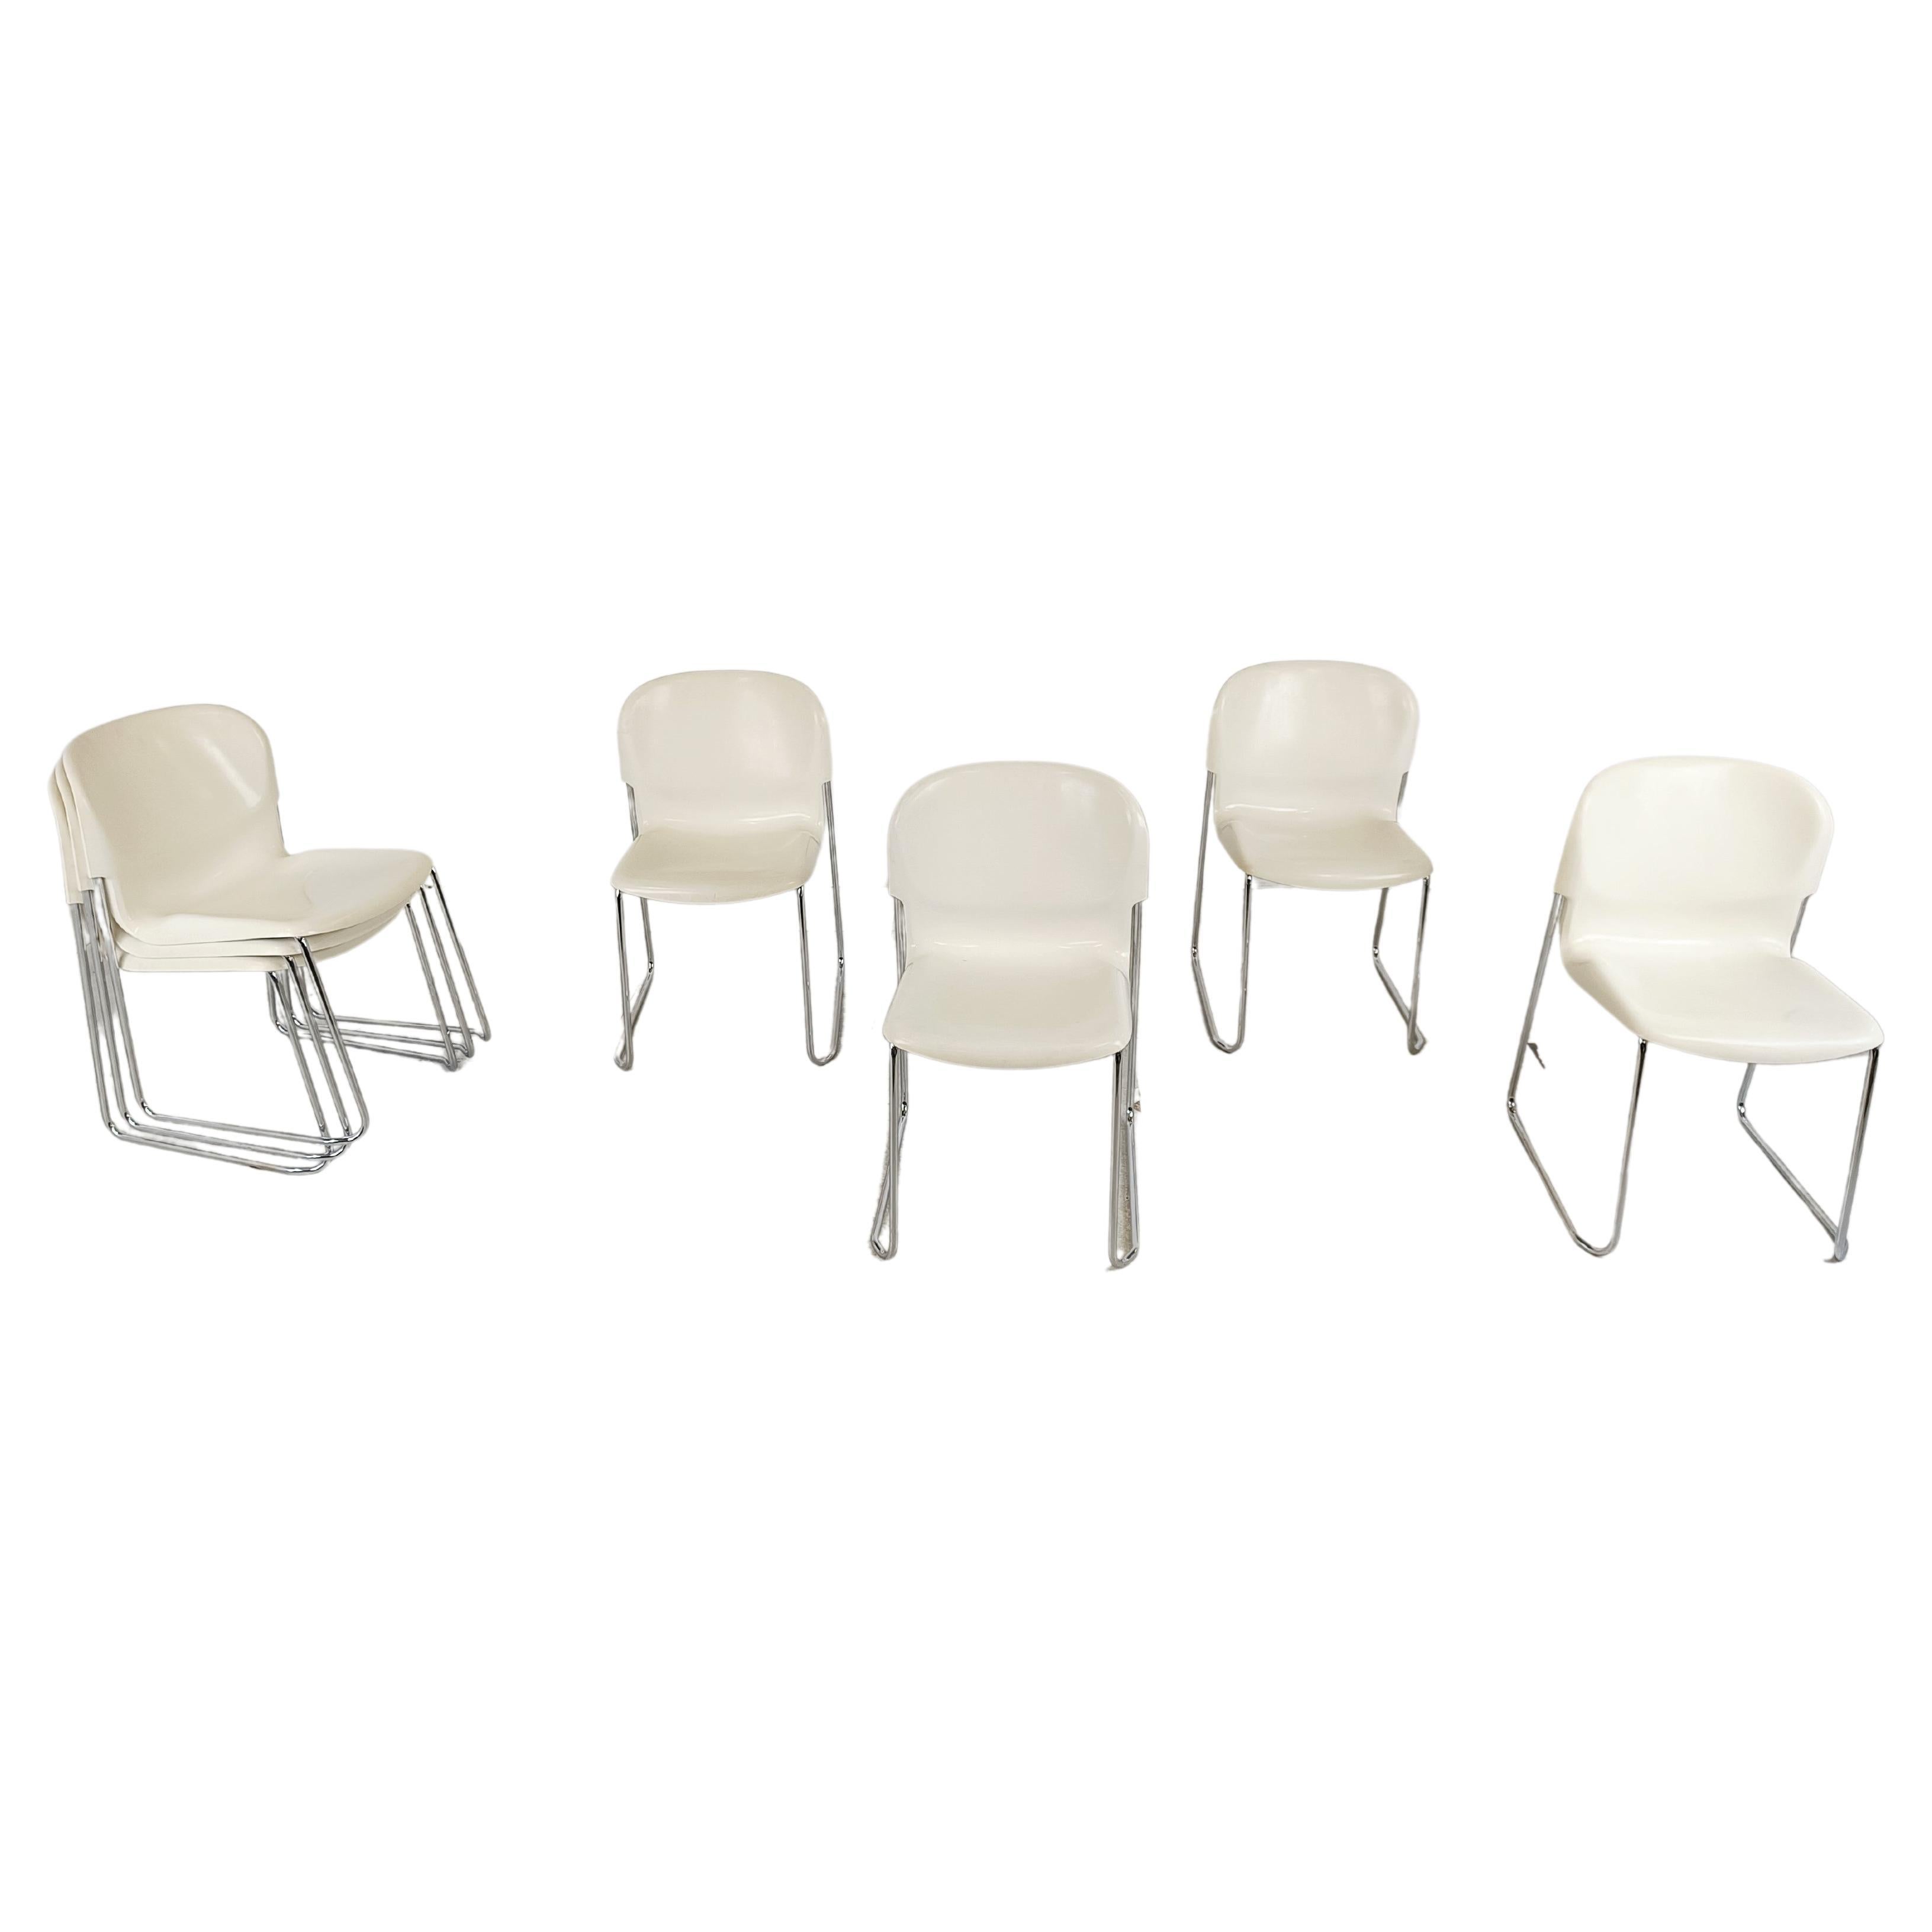 Vintage Drabert SM400 stacking chairs by Gerd Lange, 1980s For Sale